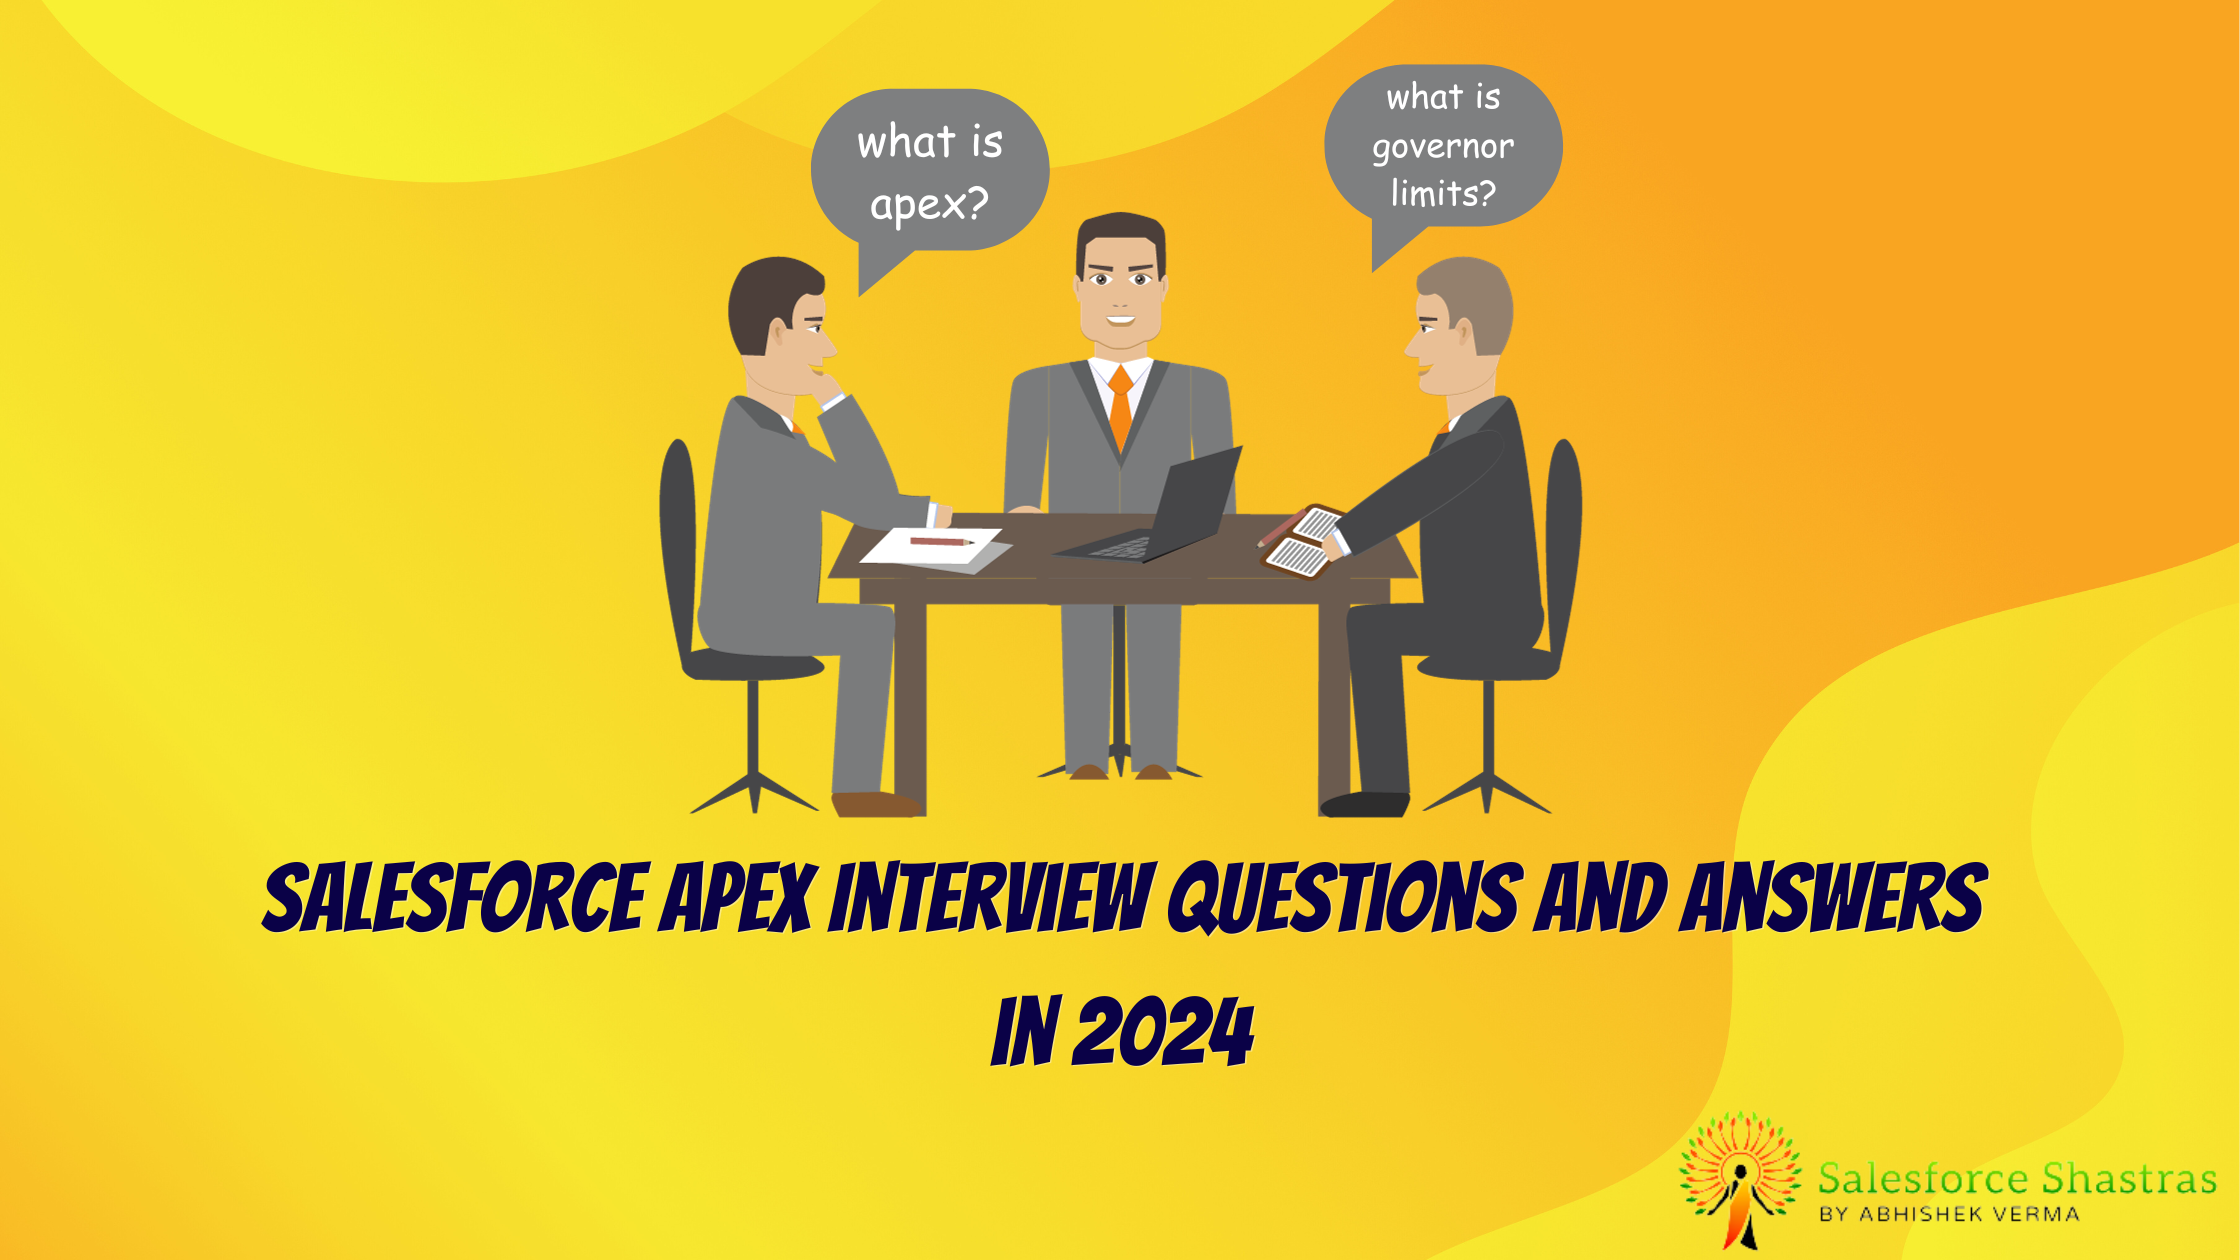 Salesforce Shastras Salesforce Apex Interview questions and answers in 2024